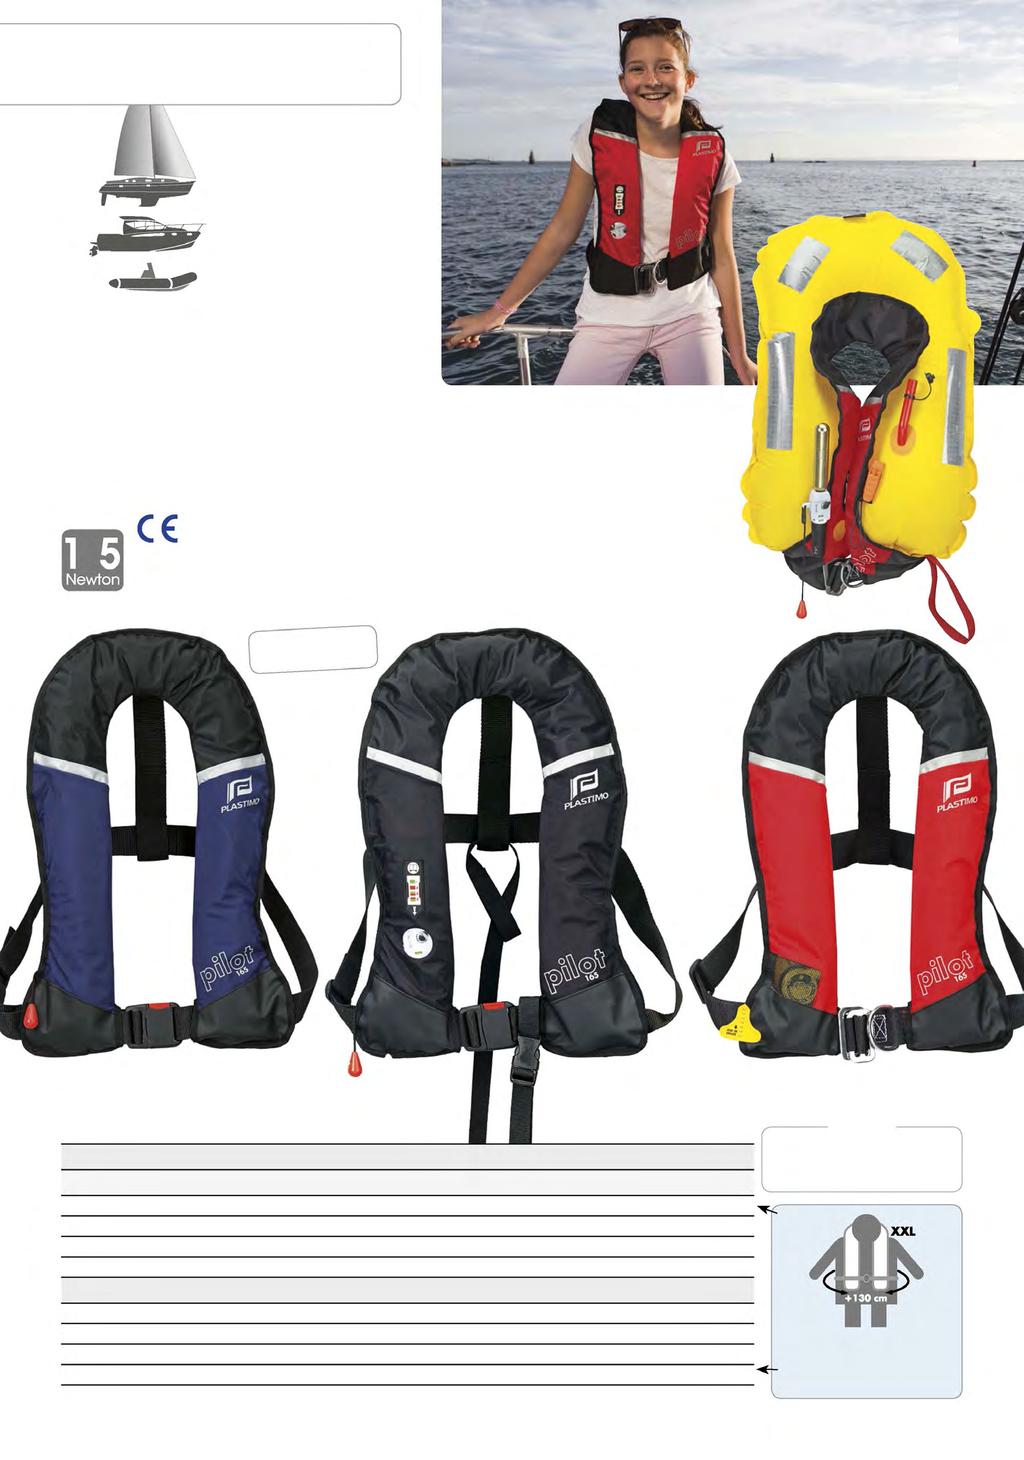 Pilot 165 lifejacket JeanMarie Liot Cruising and intensive use. Buoyancy : Rated 150 N, actual buoyancy 165 N (33 g CO 2 gas bottle).